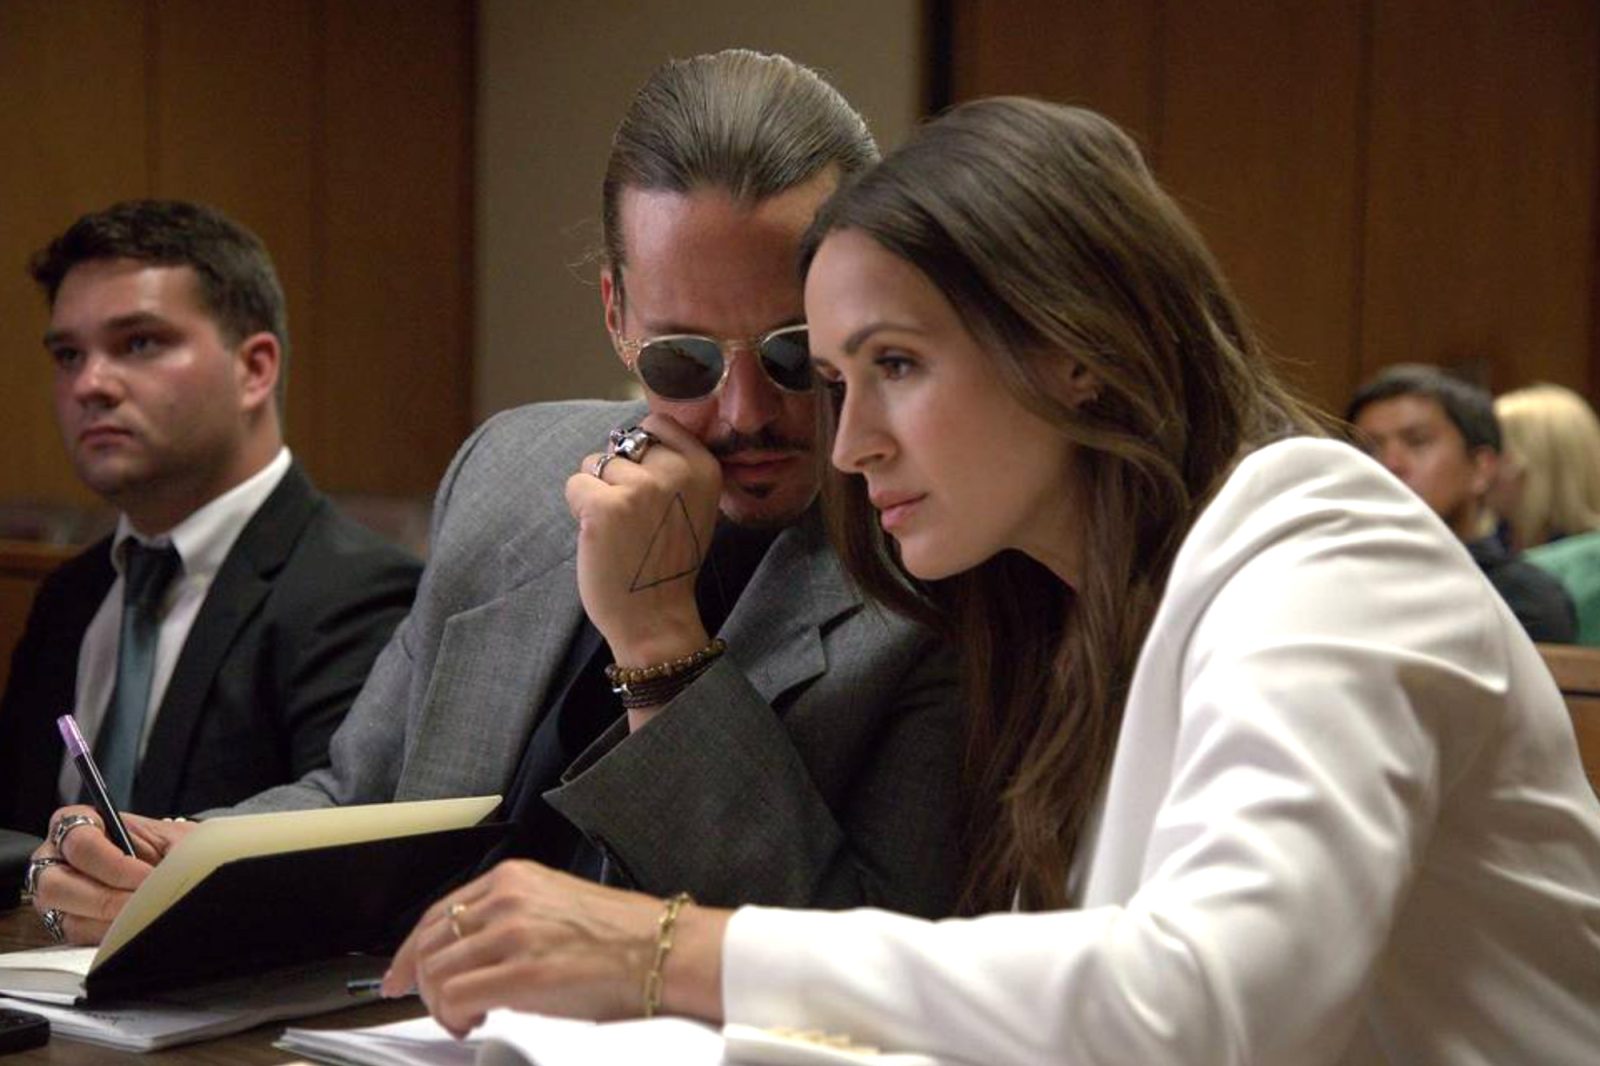 'Hot Take' courtroom drama based on Amber Heard & Johnny Depp's trial gets a trailer